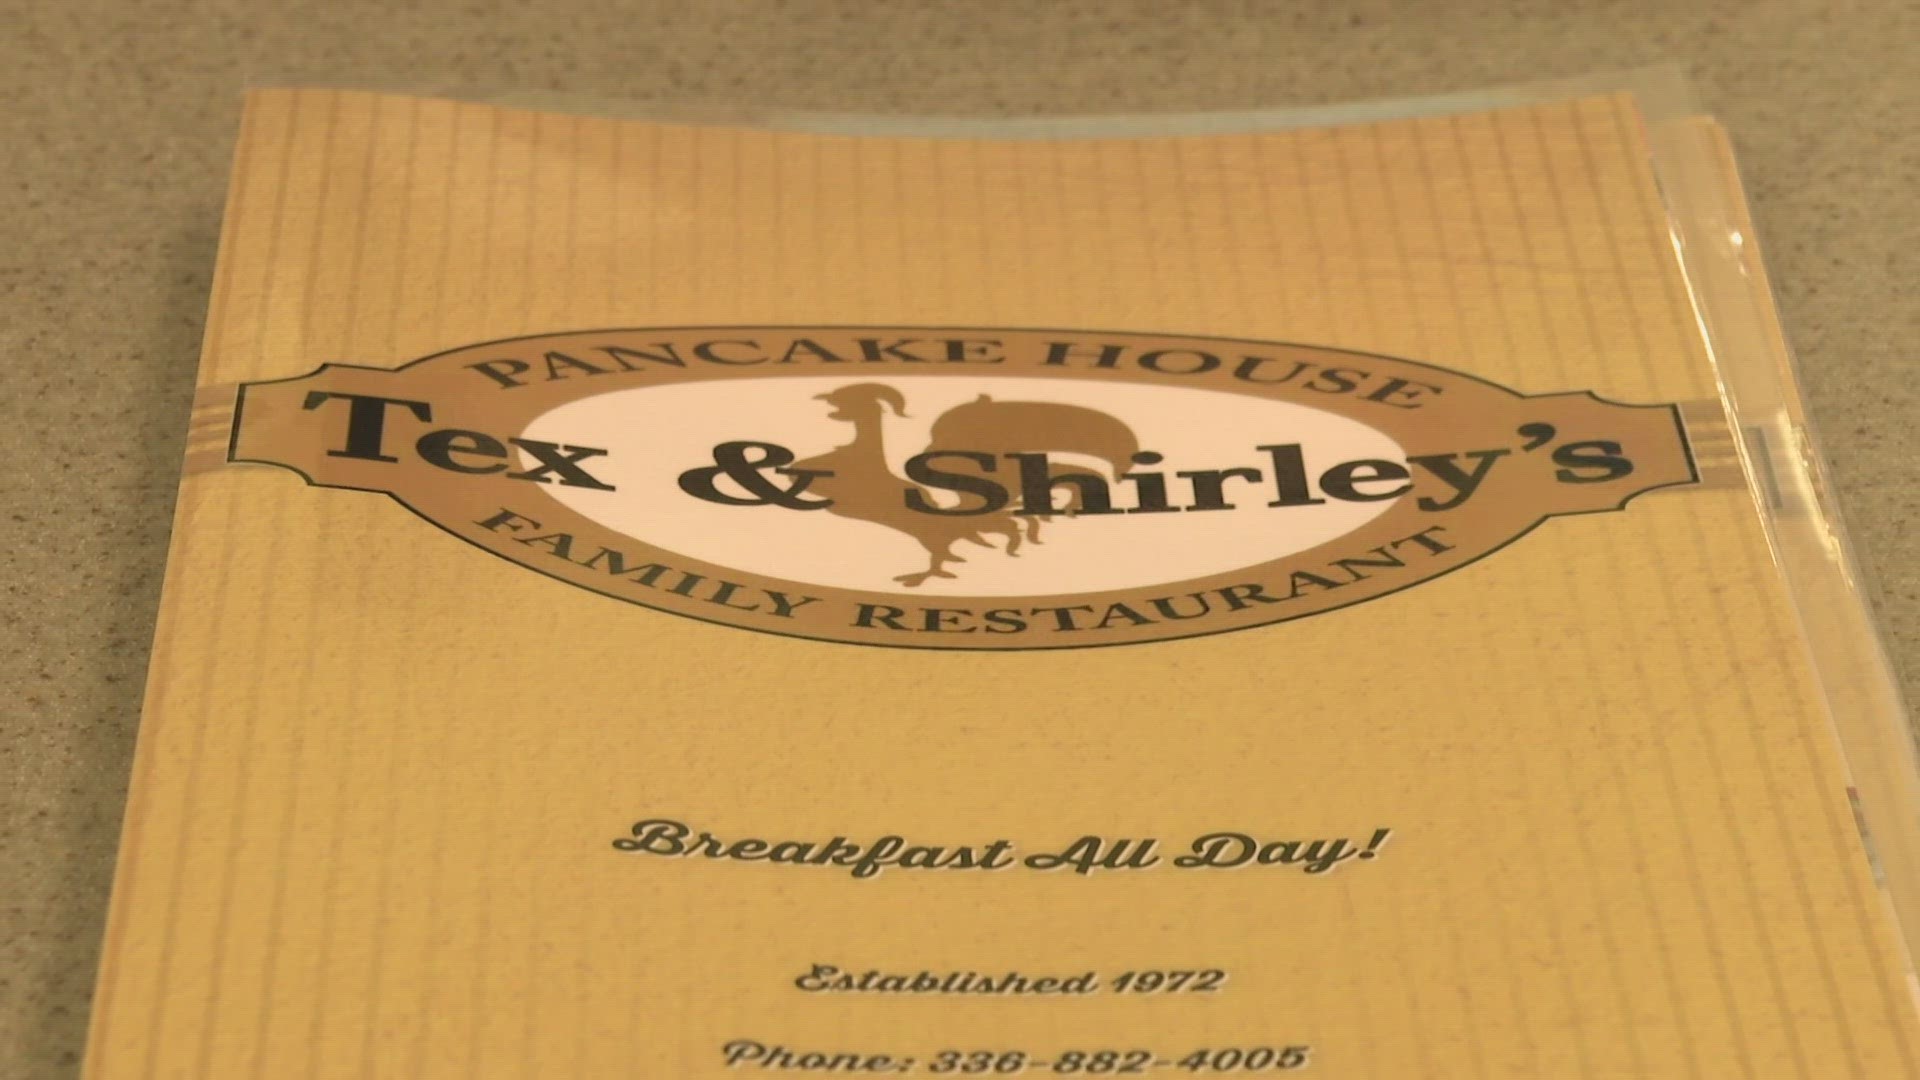 High Point’s Tex & Shirley’s is shutting its doors as the owner, Bart Ortiz Jr, retires after 45 years.